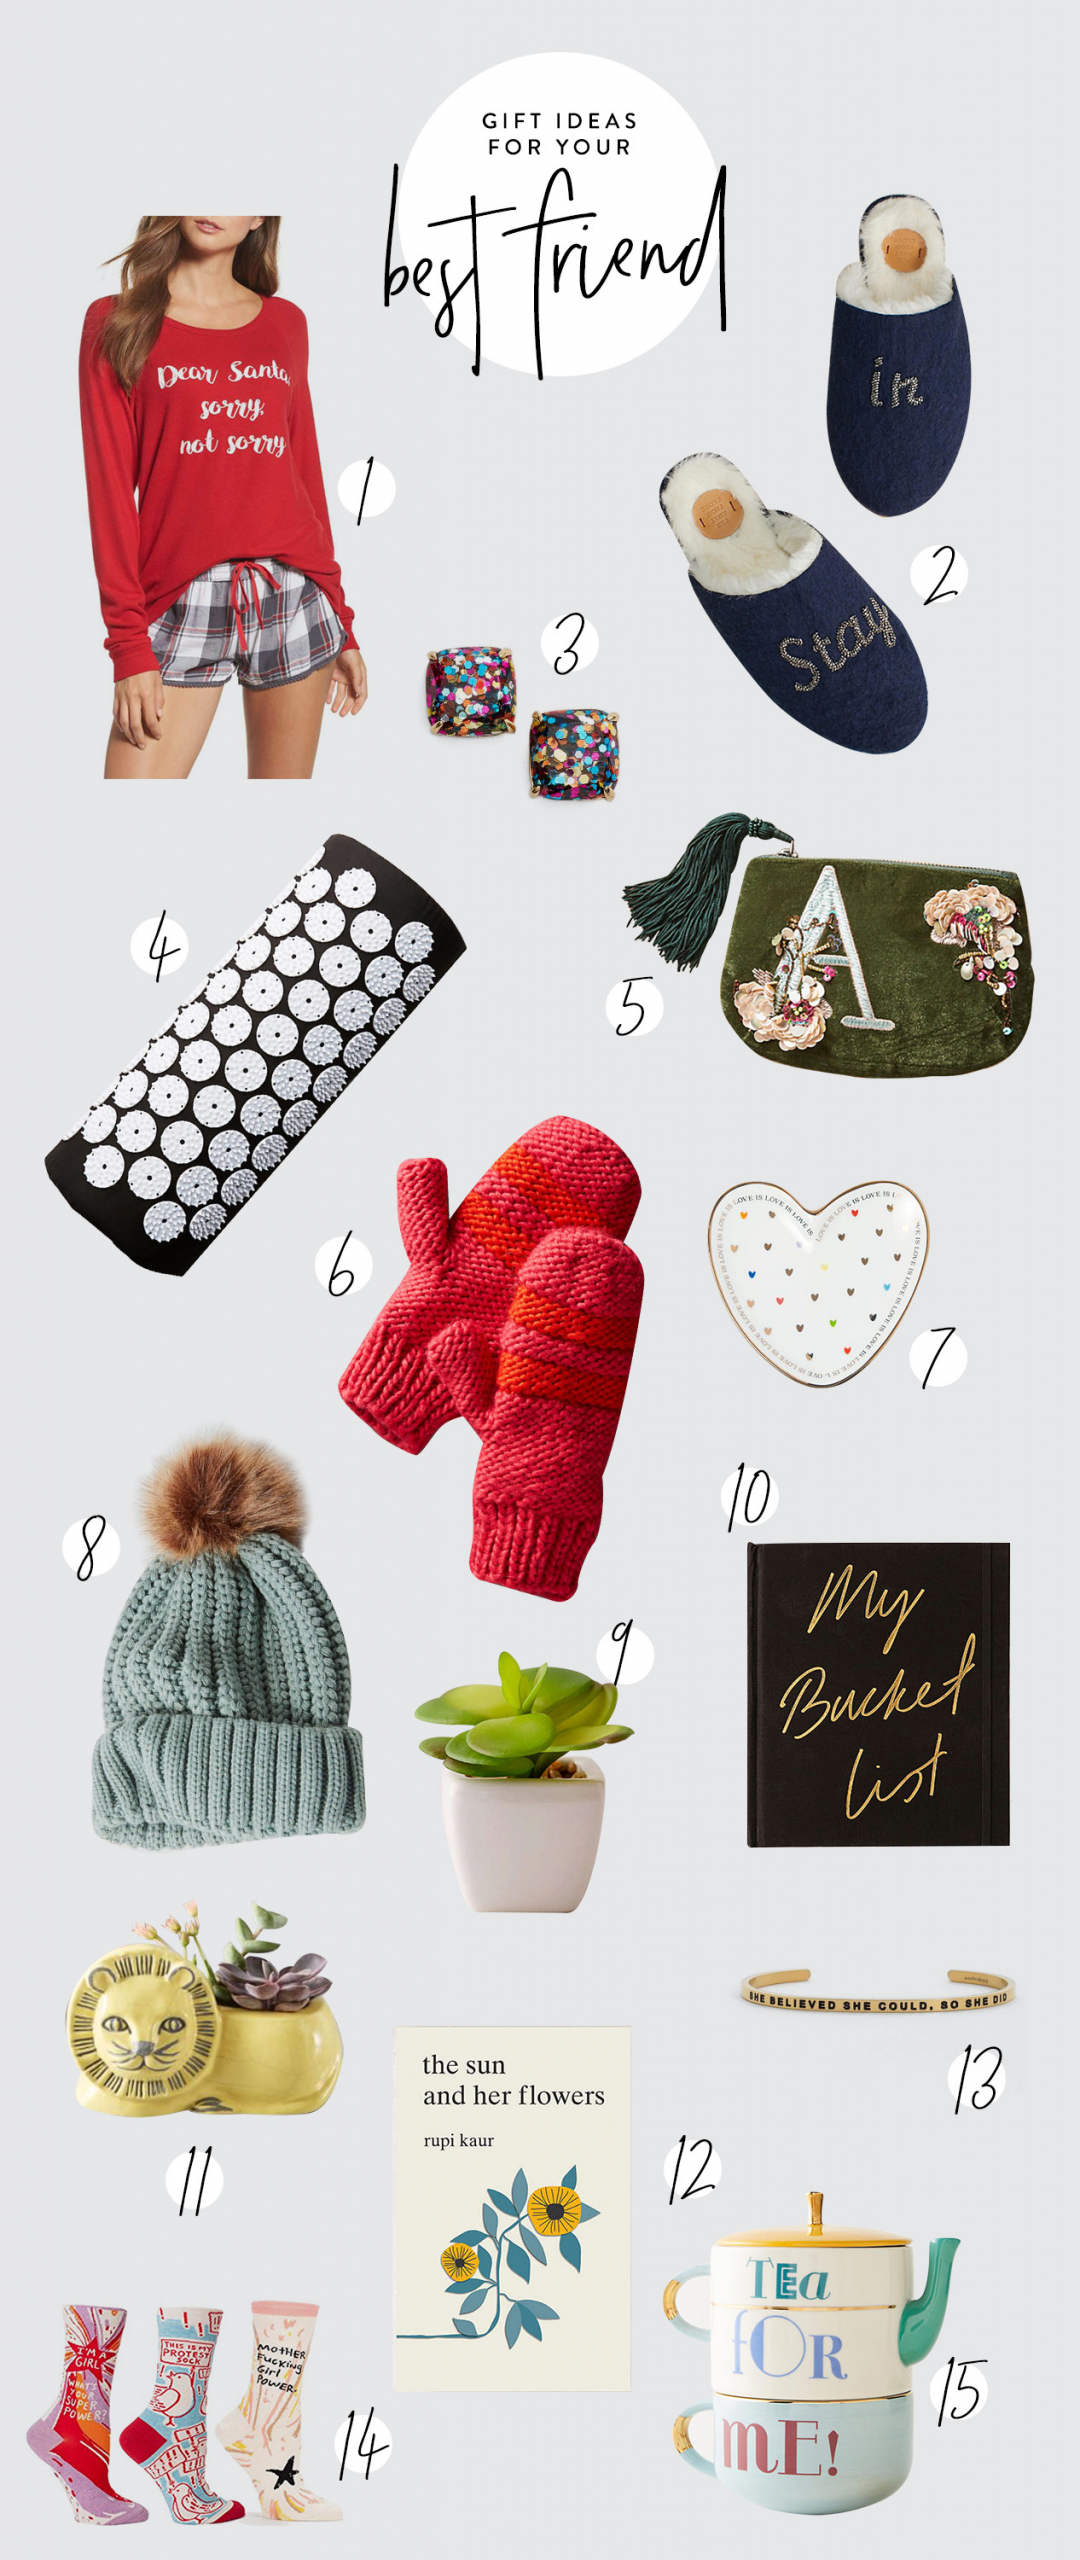 Gift Ideas For Your Best Friend
 The Ultimate Guide for Holiday Gift Ideas